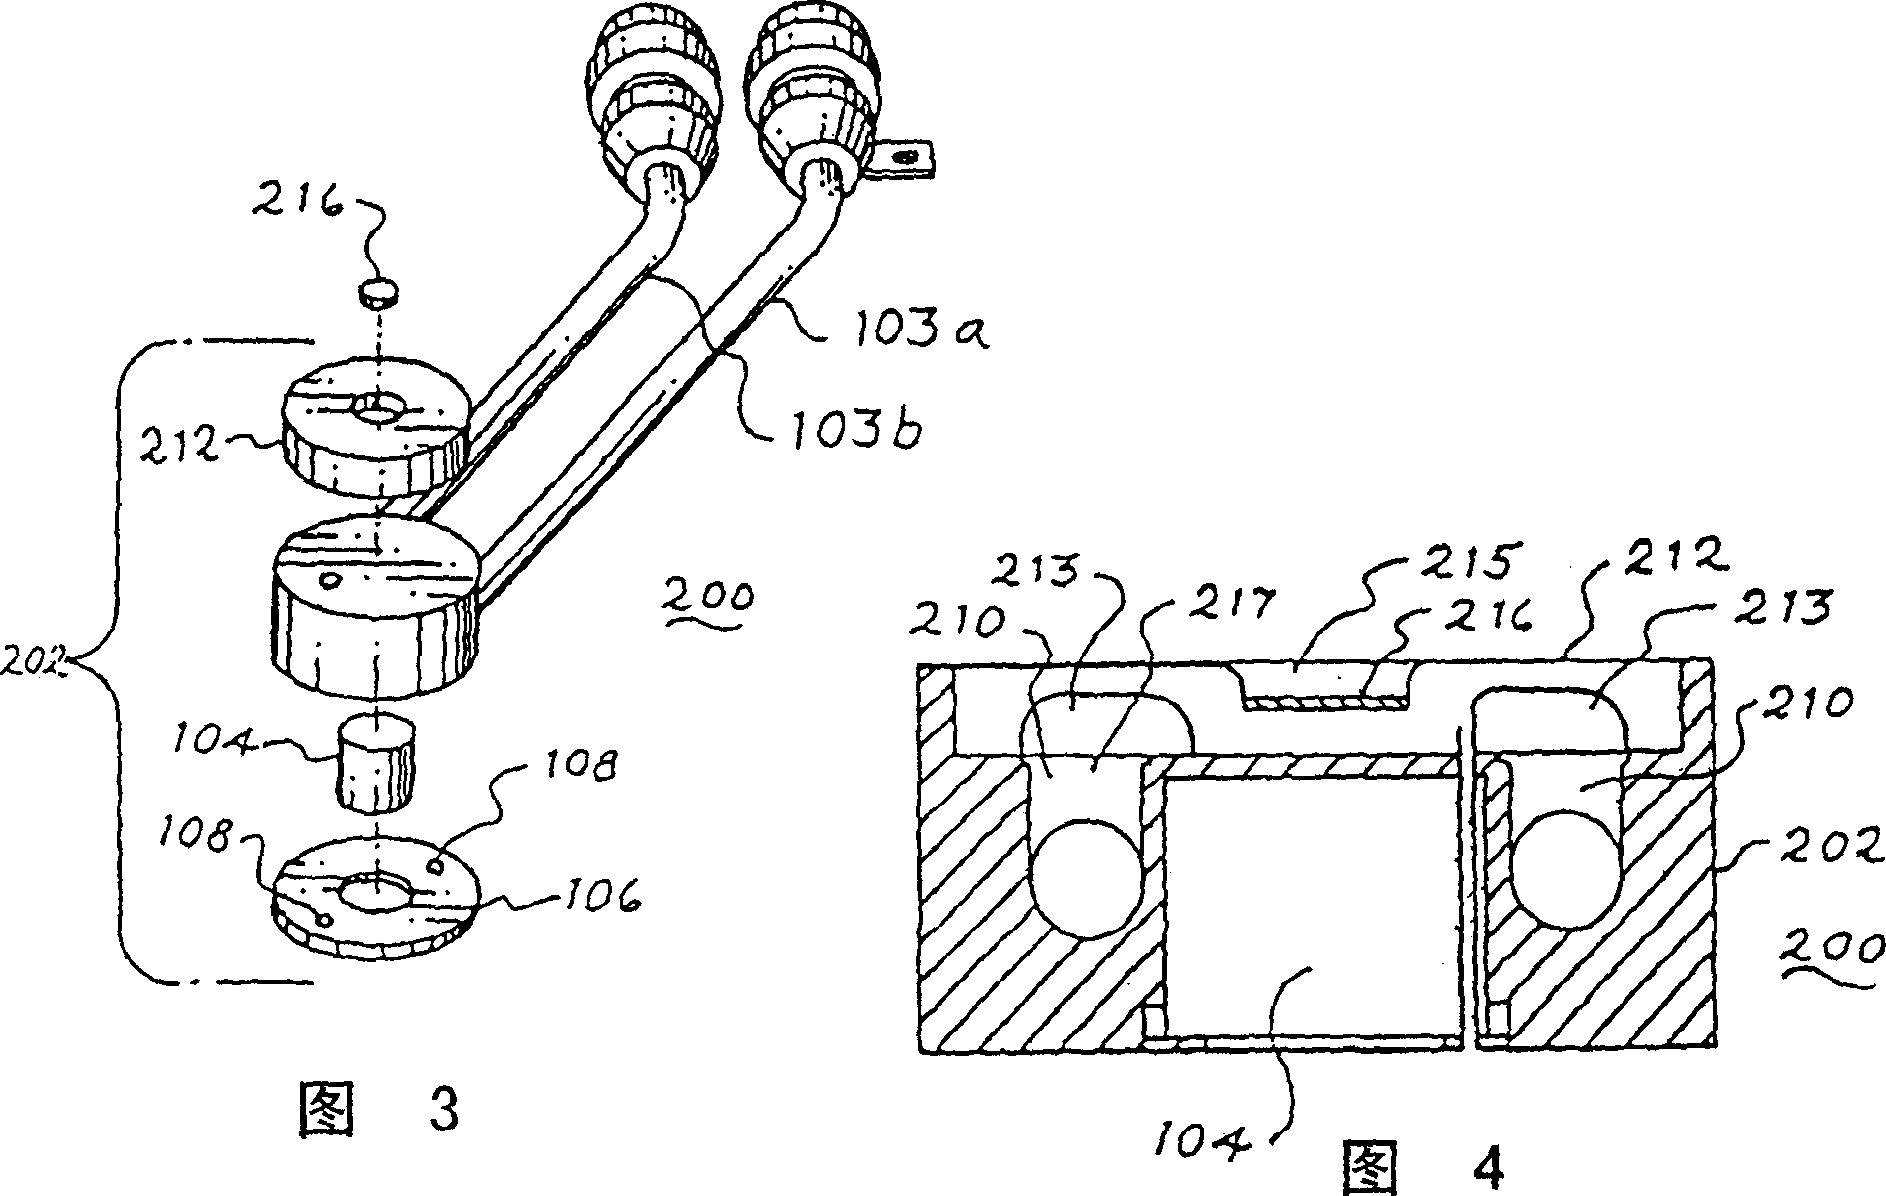 Tungsten composite X-ray target assembly for radioactive treatment